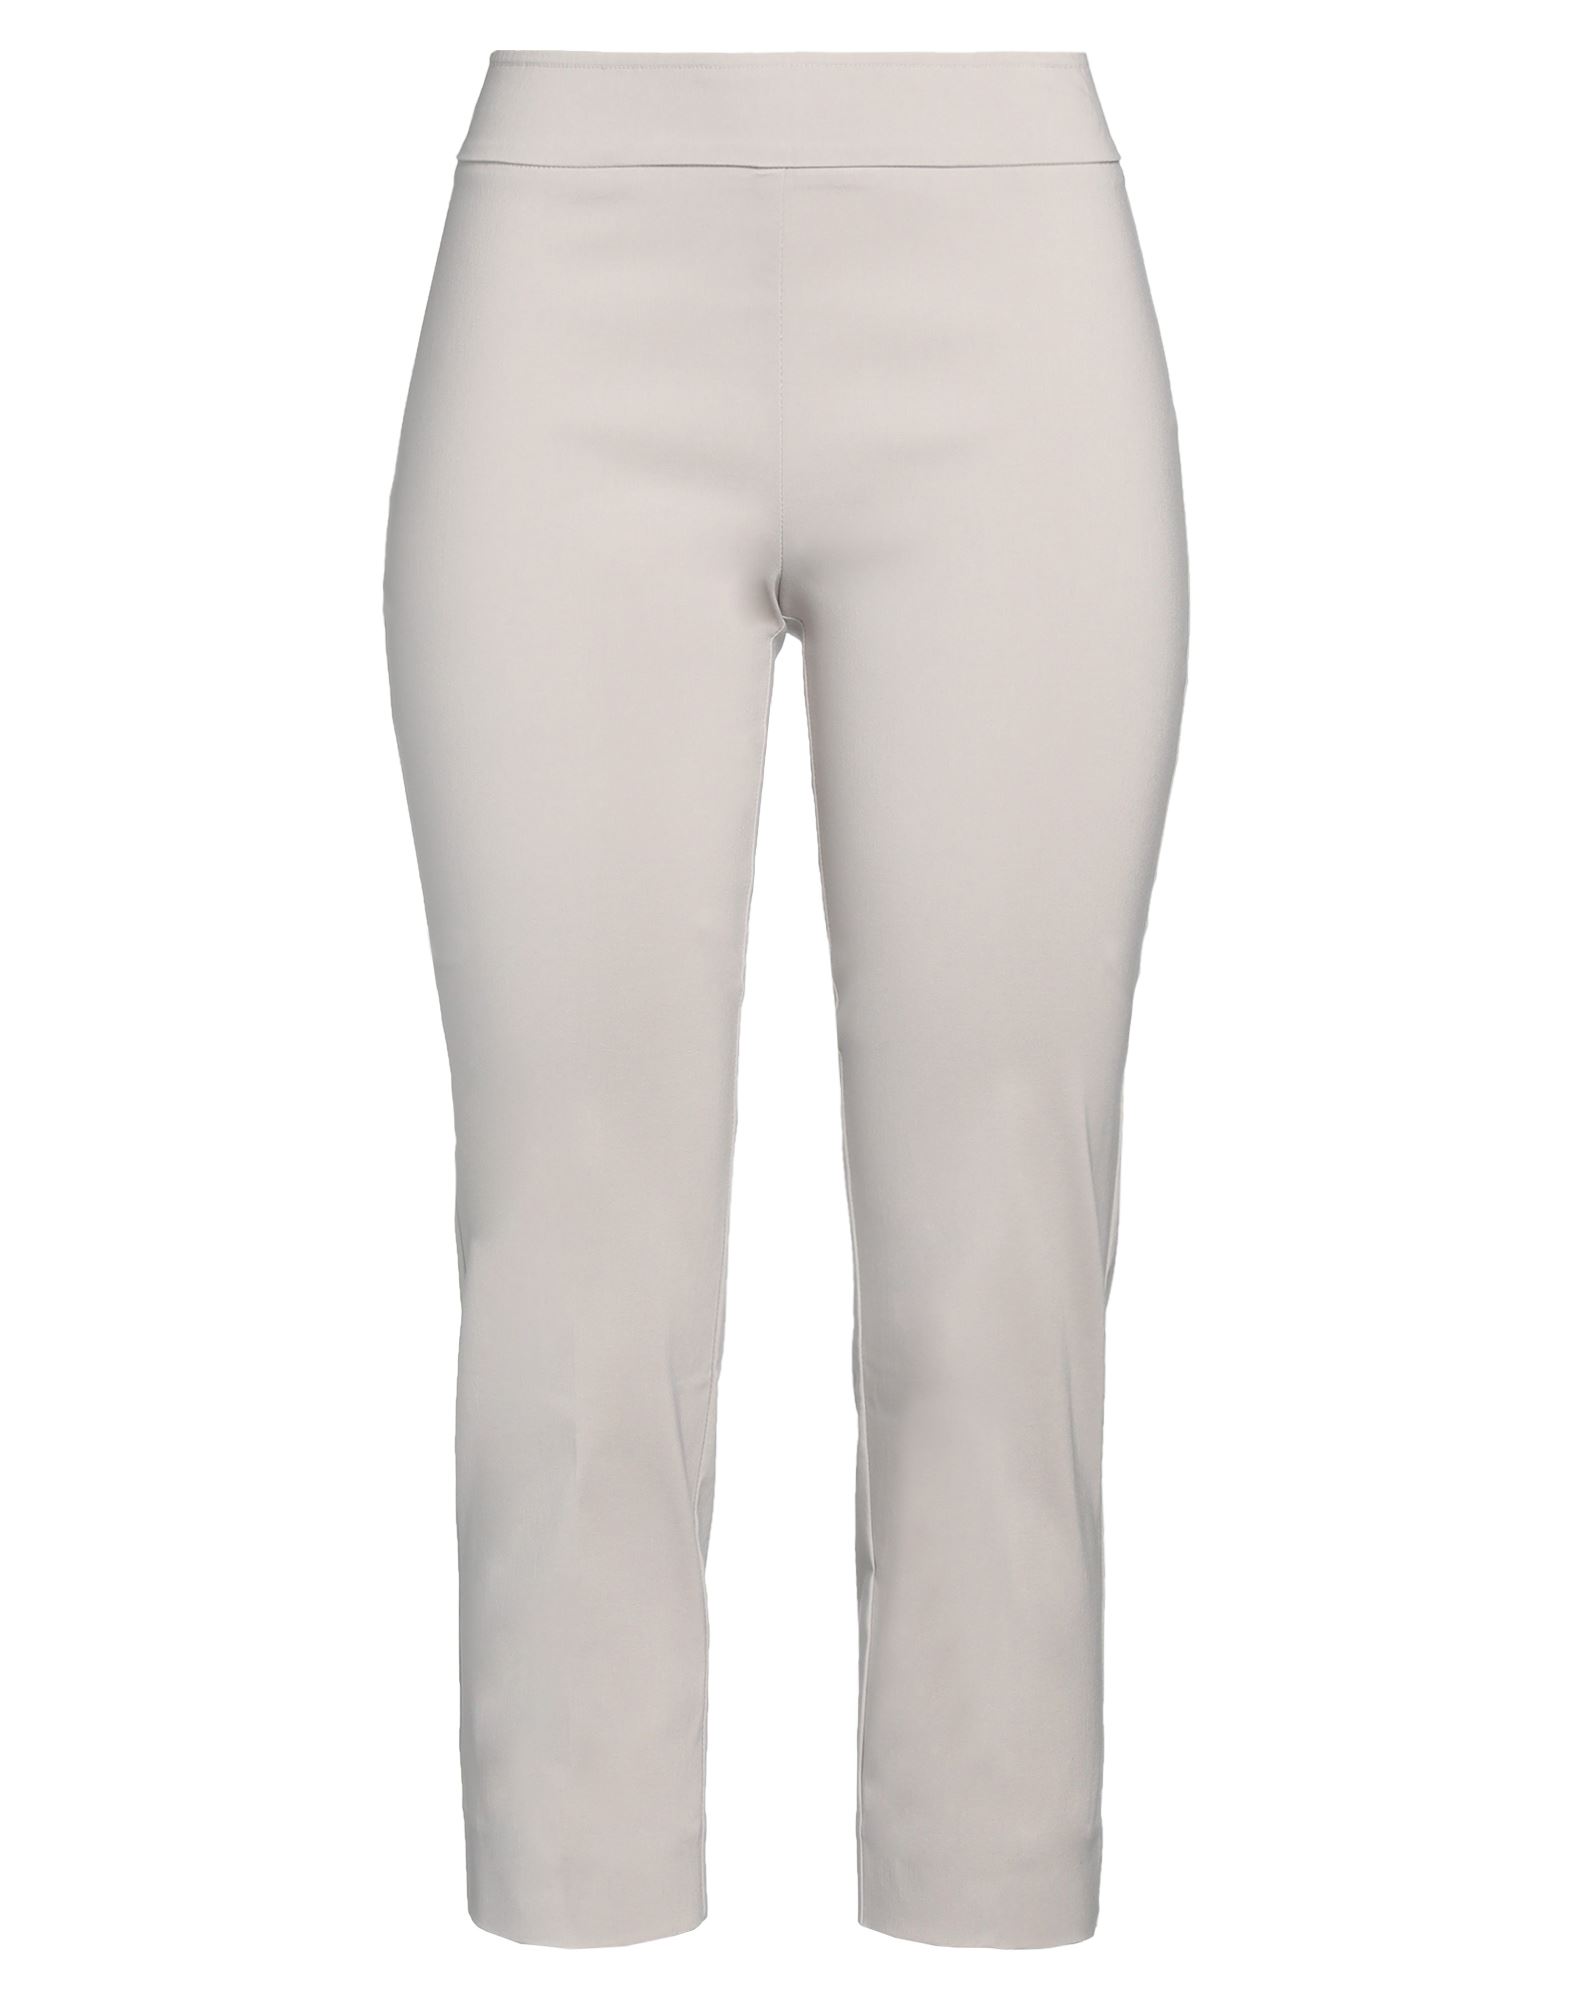 Avenue Montaigne Cropped Pants In Grey